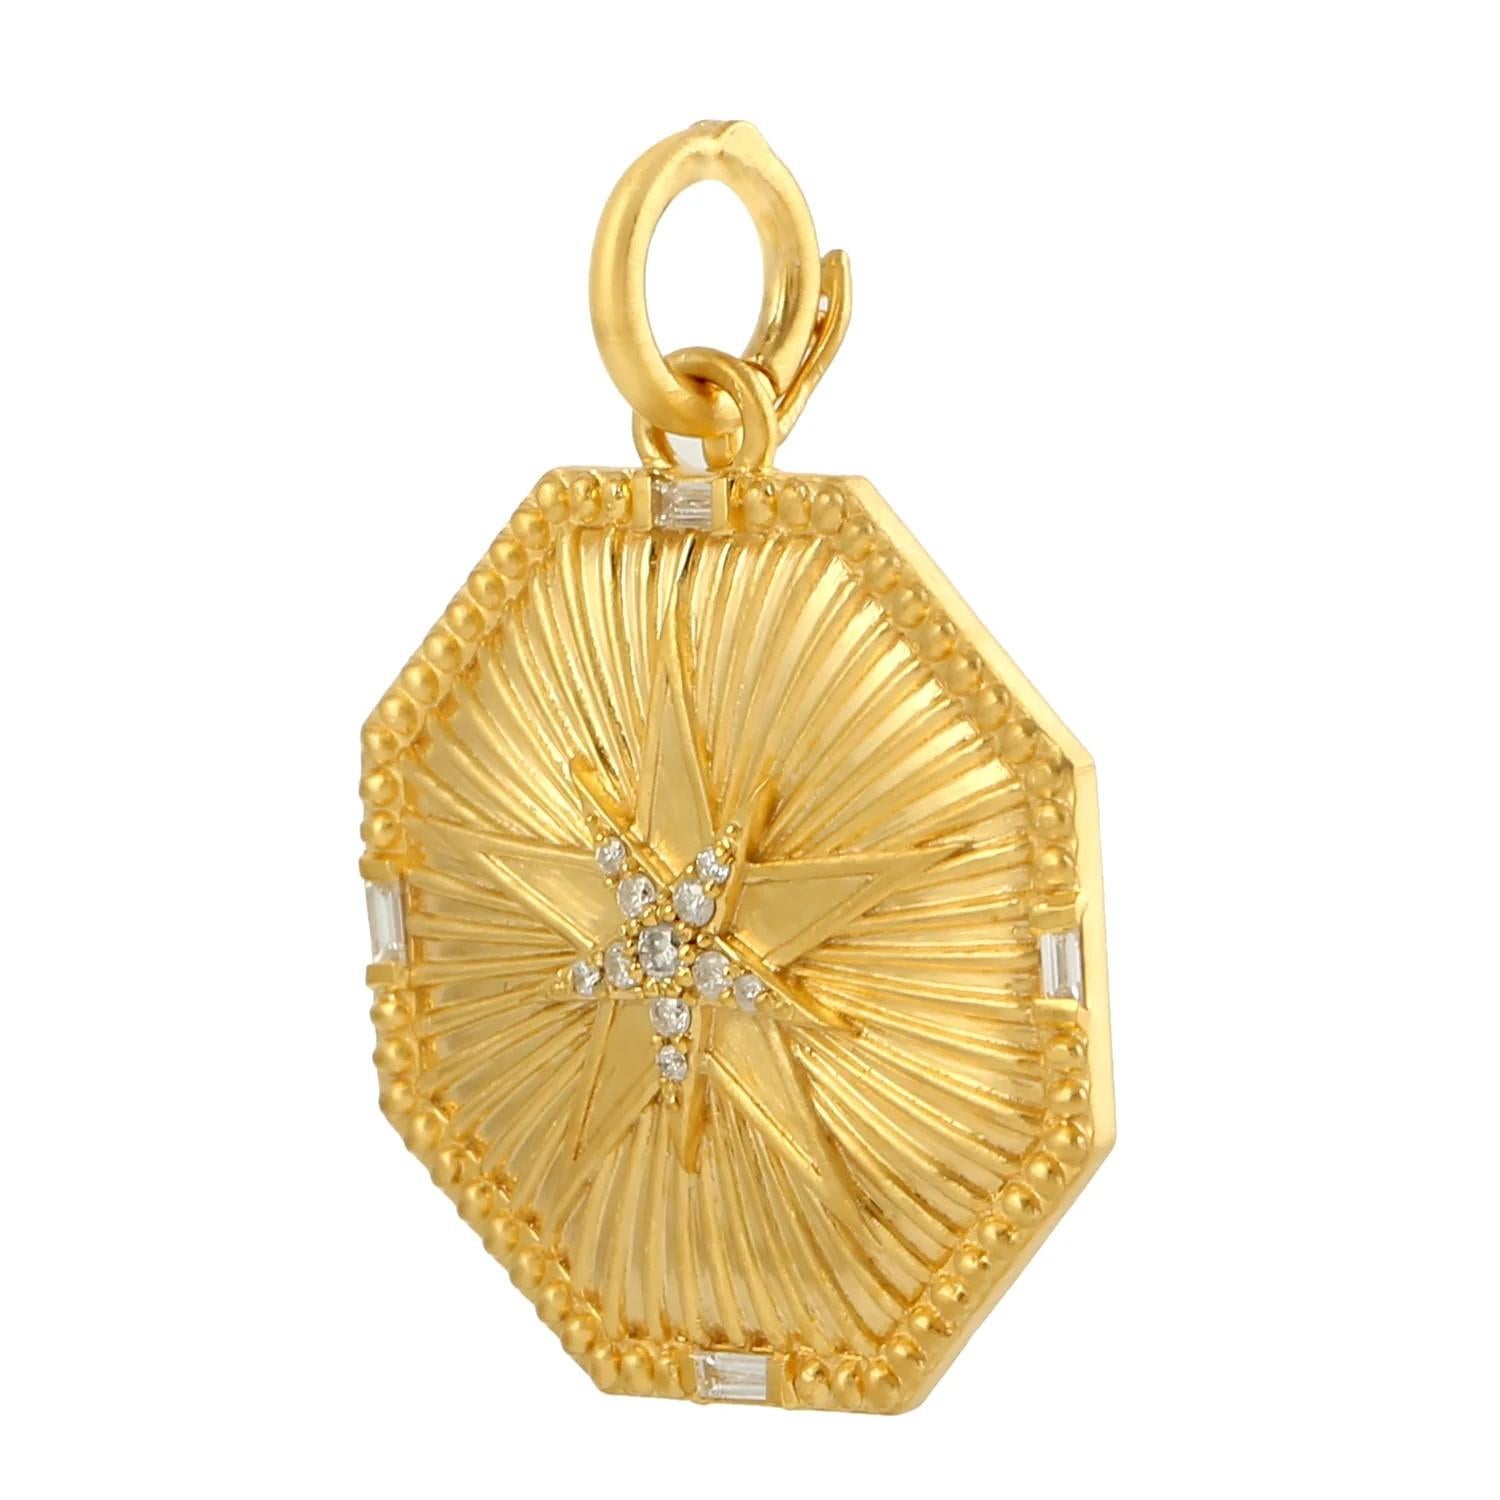 This medallion charm has been meticulously crafted from 14-karat gold and set in .17 carats of sparkling diamonds. 

FOLLOW  MEGHNA JEWELS storefront to view the latest collection & exclusive pieces.  Meghna Jewels is proudly rated as a Top Seller